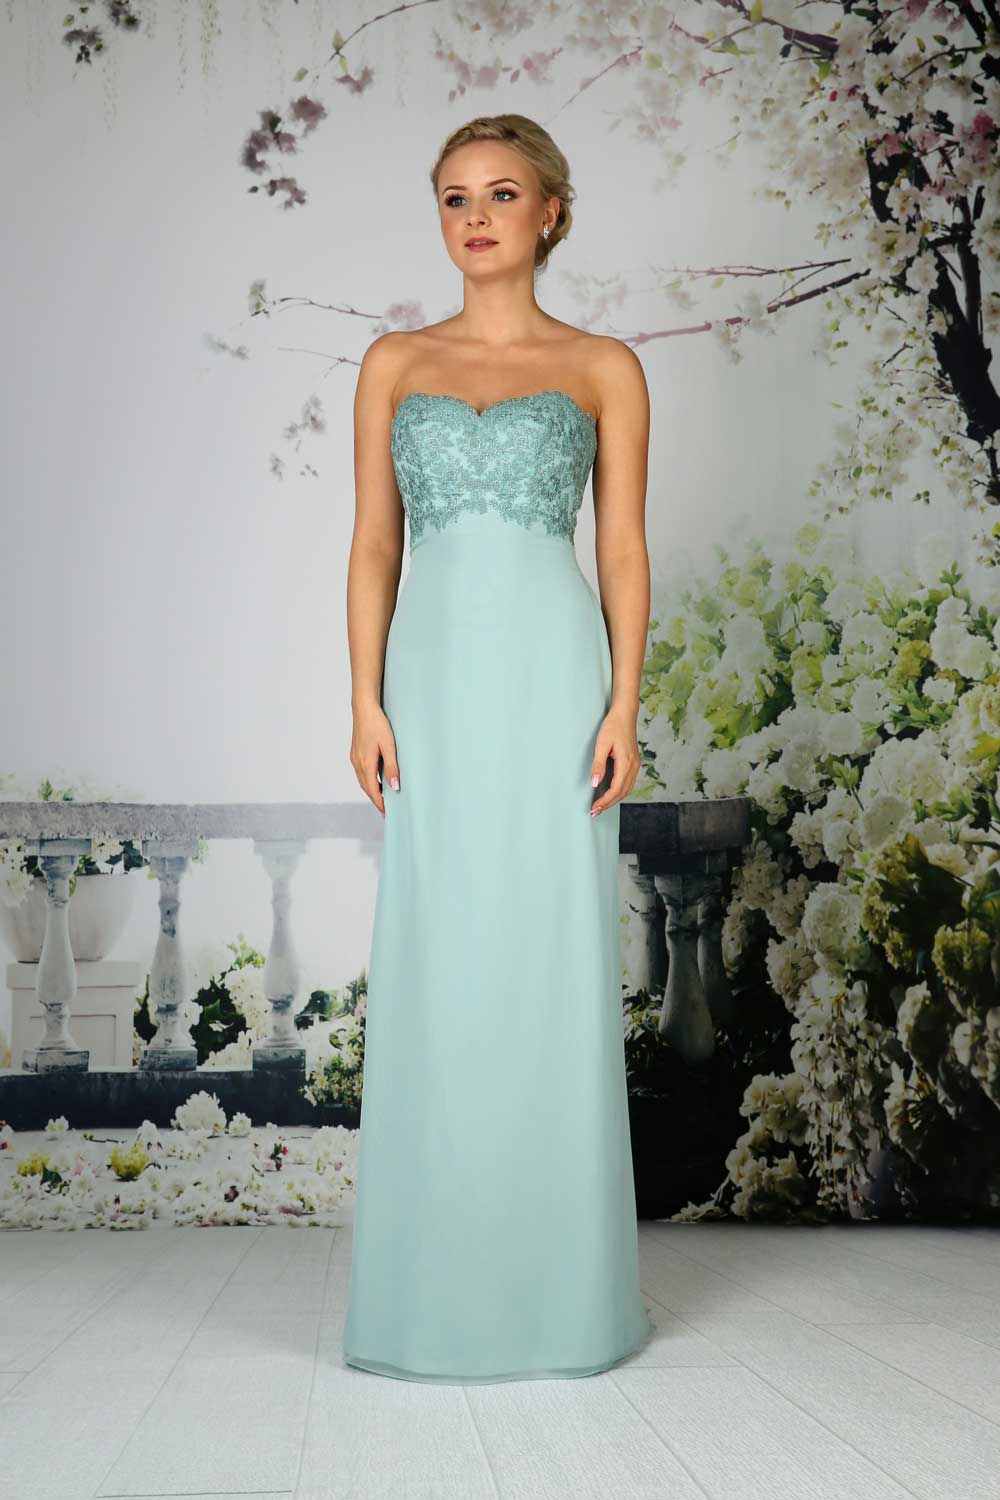 Bridesmaids strapless chiffon gown with lace empire bodice